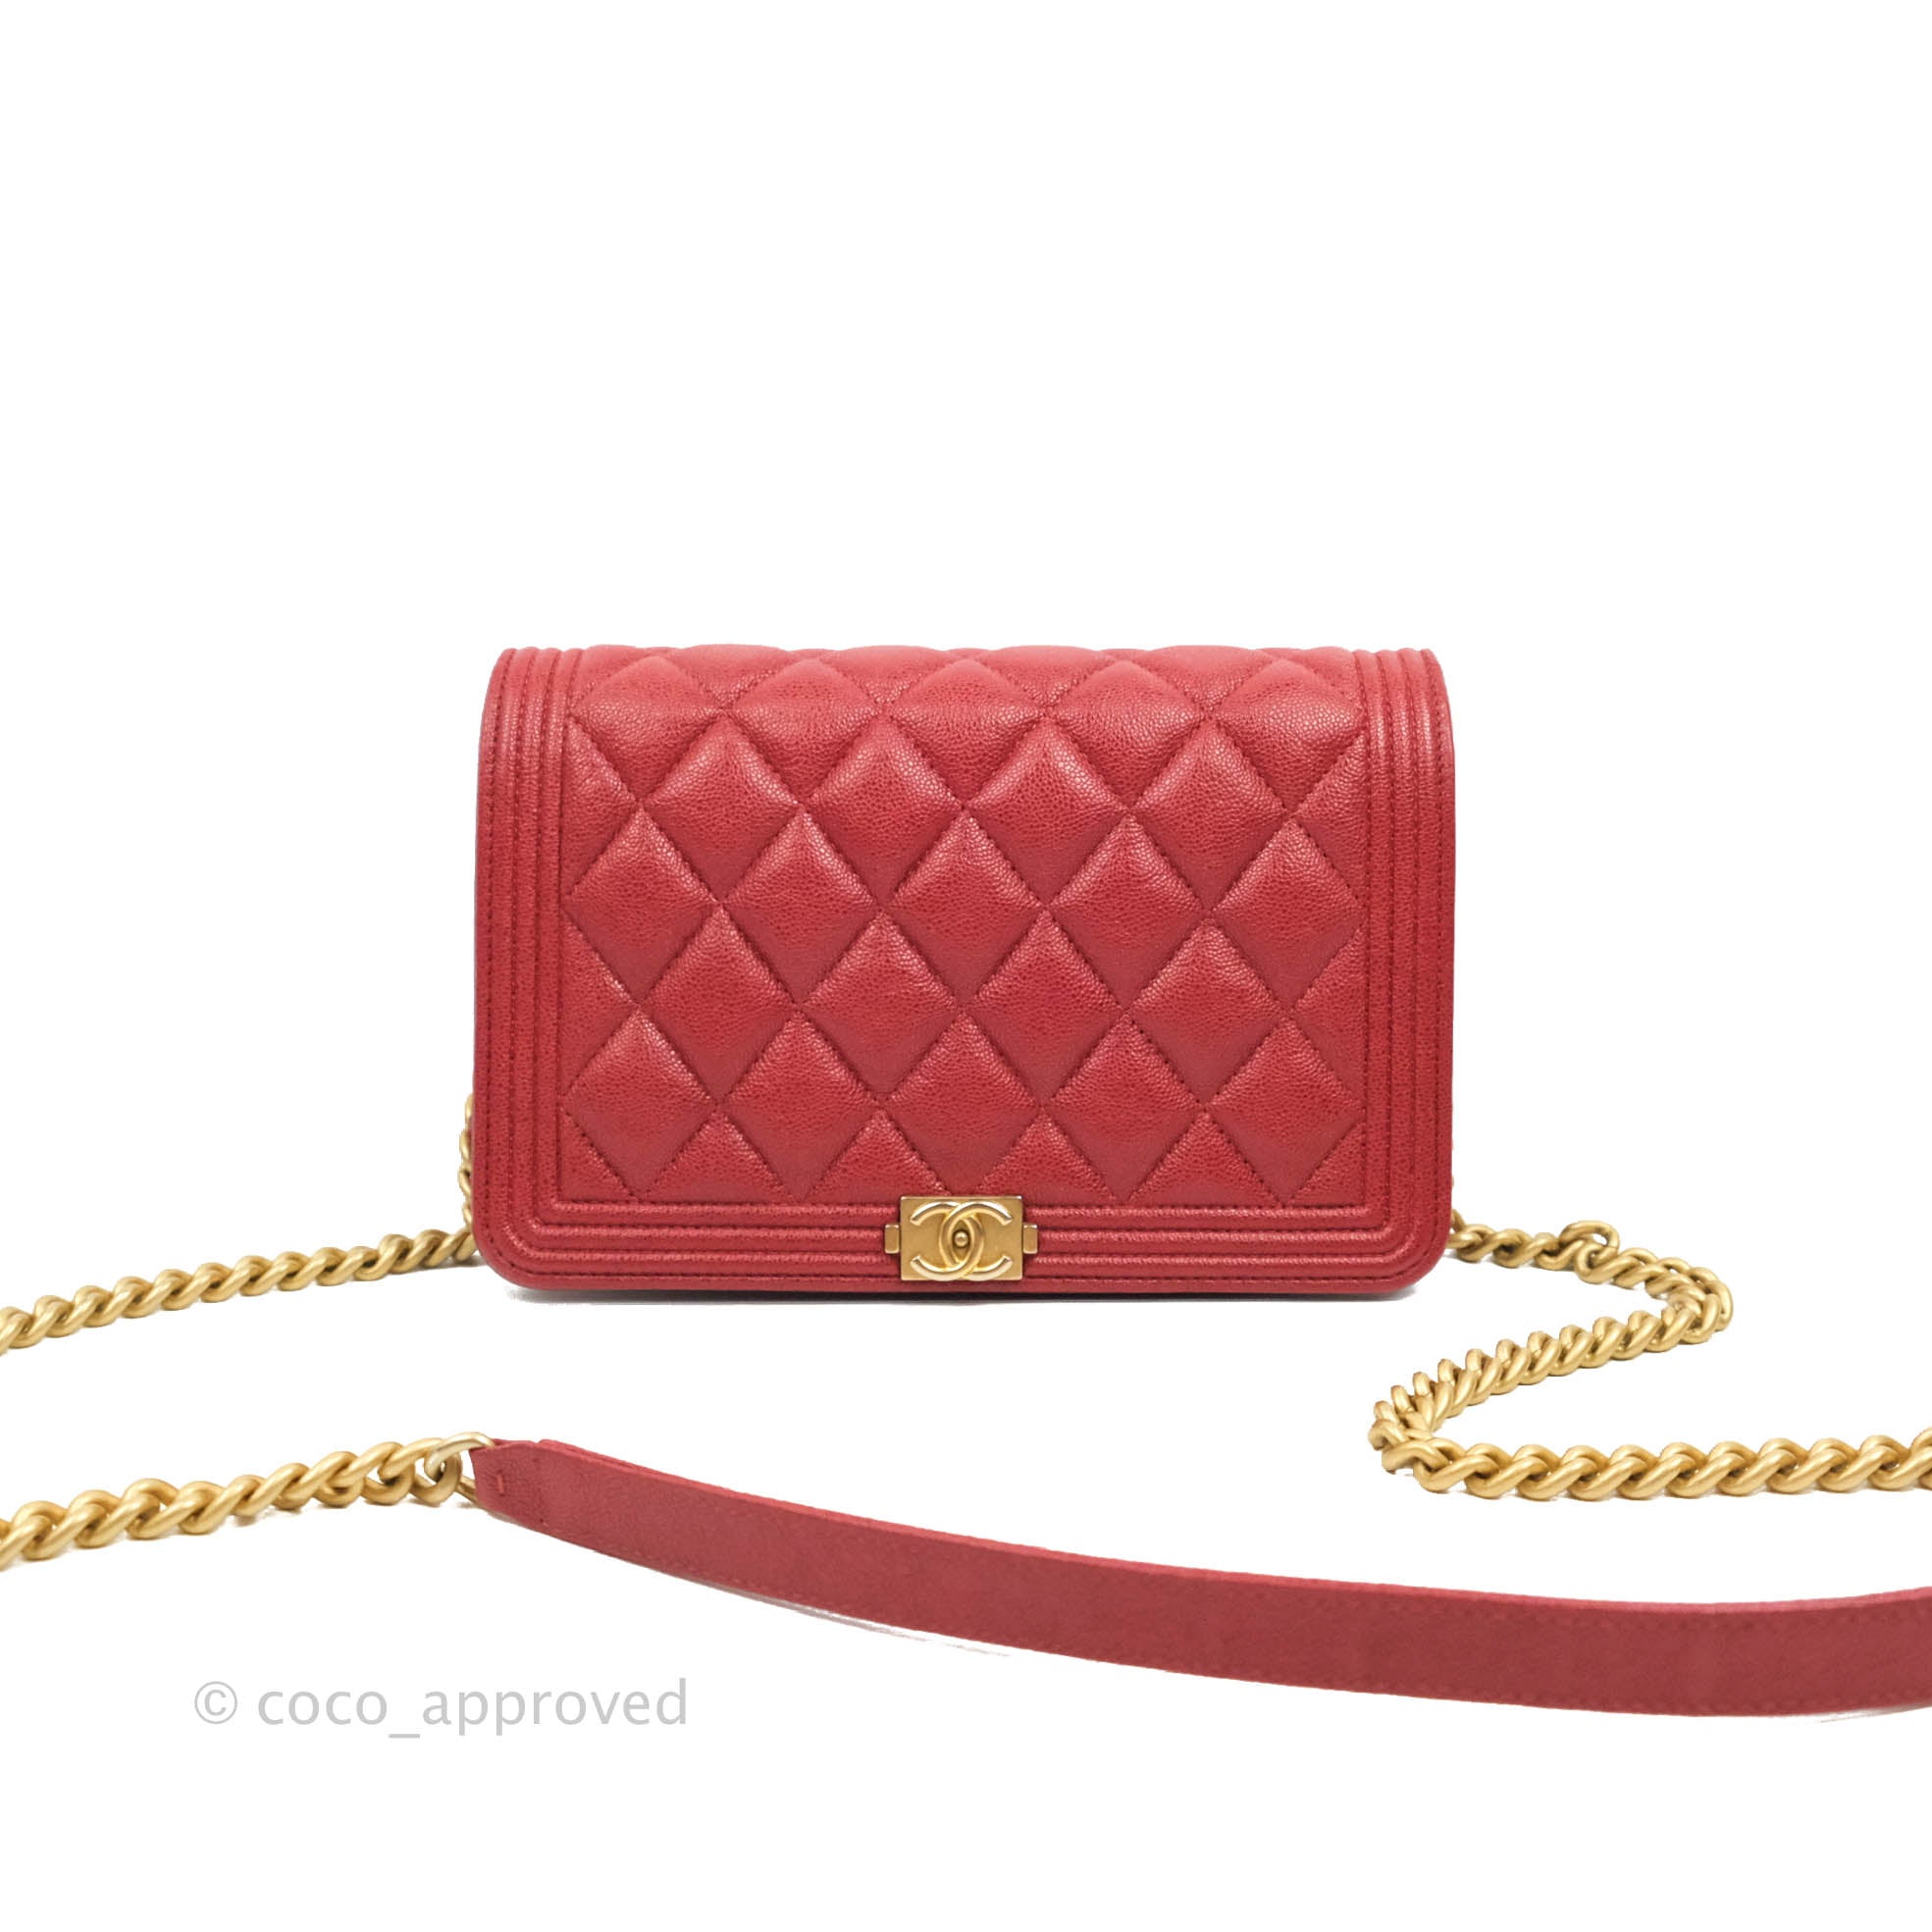 Preowned Authentic Chanel Quilted 2015 Red Caviar Wallet on Chain WOC SHW